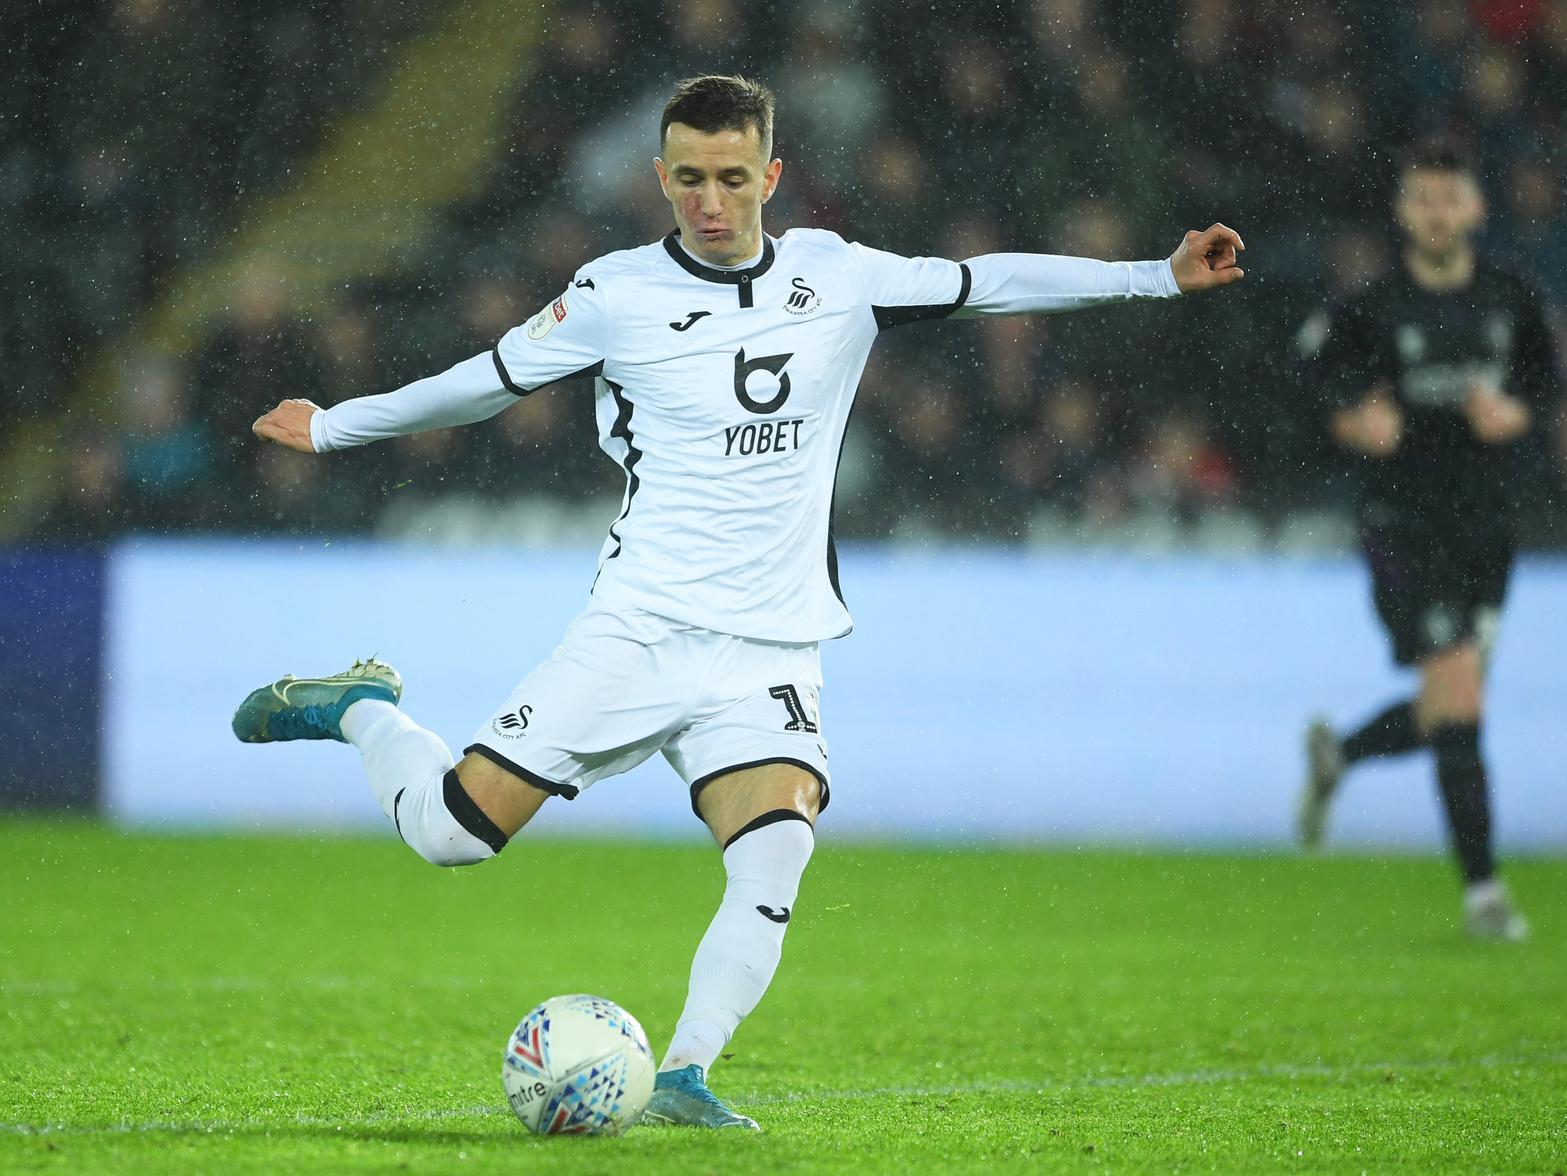 Brighton manager Graham Potter will potentially go back to his former club Swansea to sign 23-year-old Kosovo midfielder Bersant Celina. (Sun on Sunday)